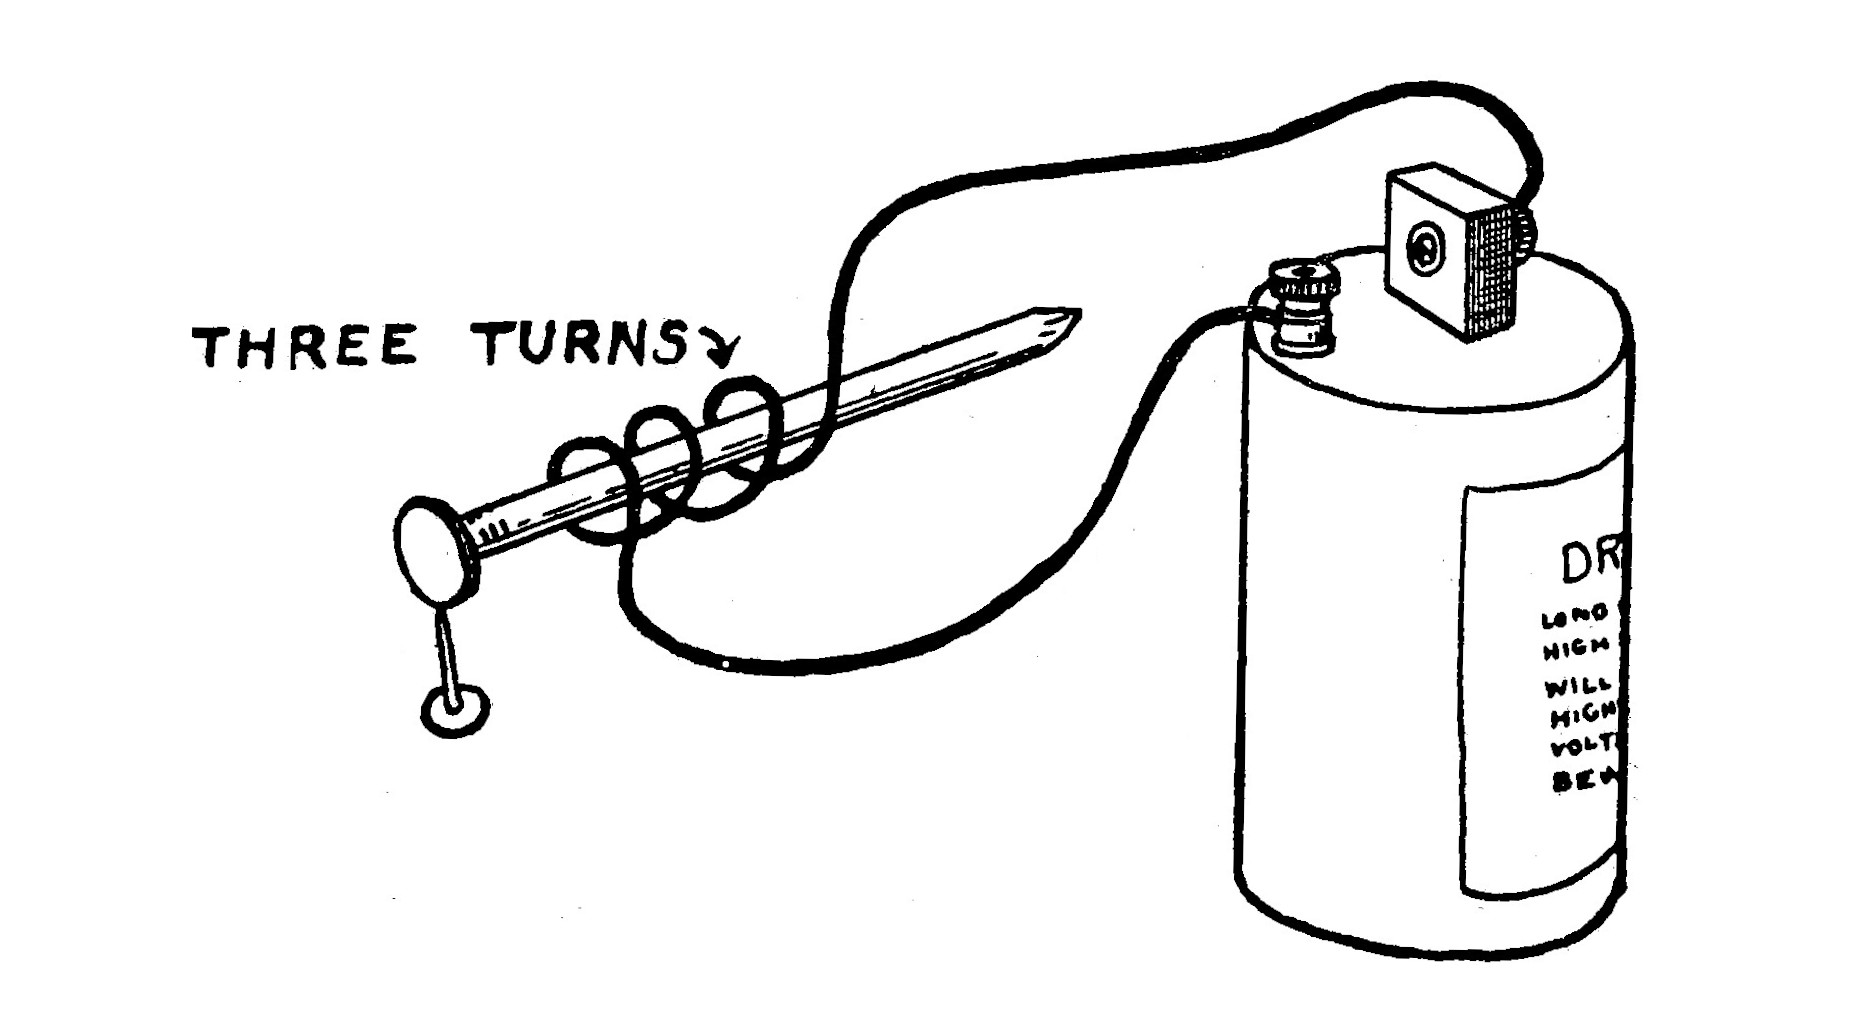 FIG 4—The strength of an electromagnet is proportional to the ampere turns.